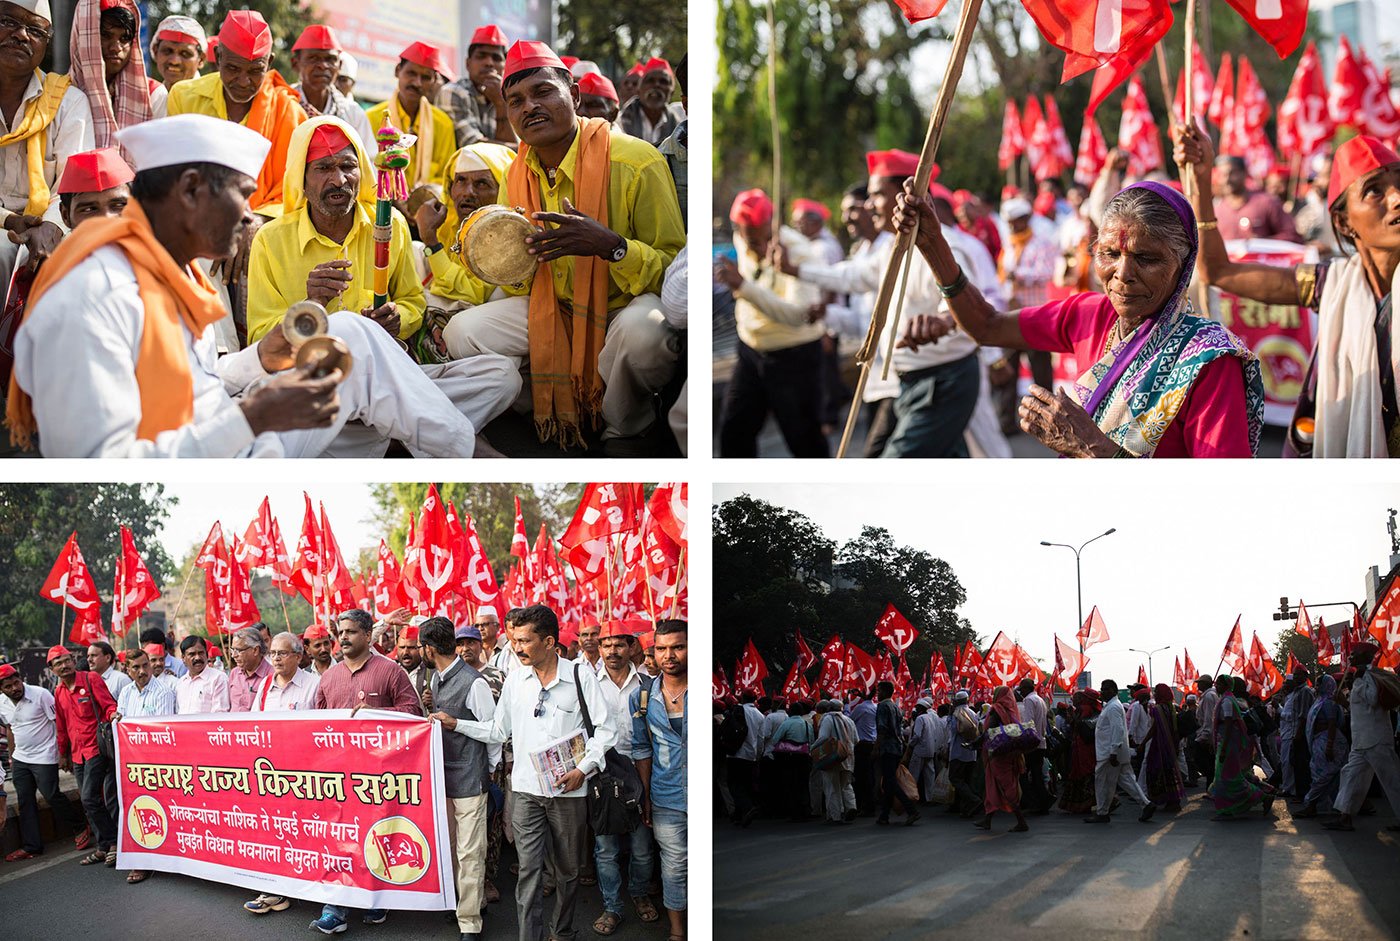 Top left - Three men singing and playing instruments. One of them is playing the cymbals. Men in red hats look on

Top right - An old woman dancing in front of people marching

Bottom left - Farmers marching holding red communist flags

Bottom right - Farmers marching holding red communist flags